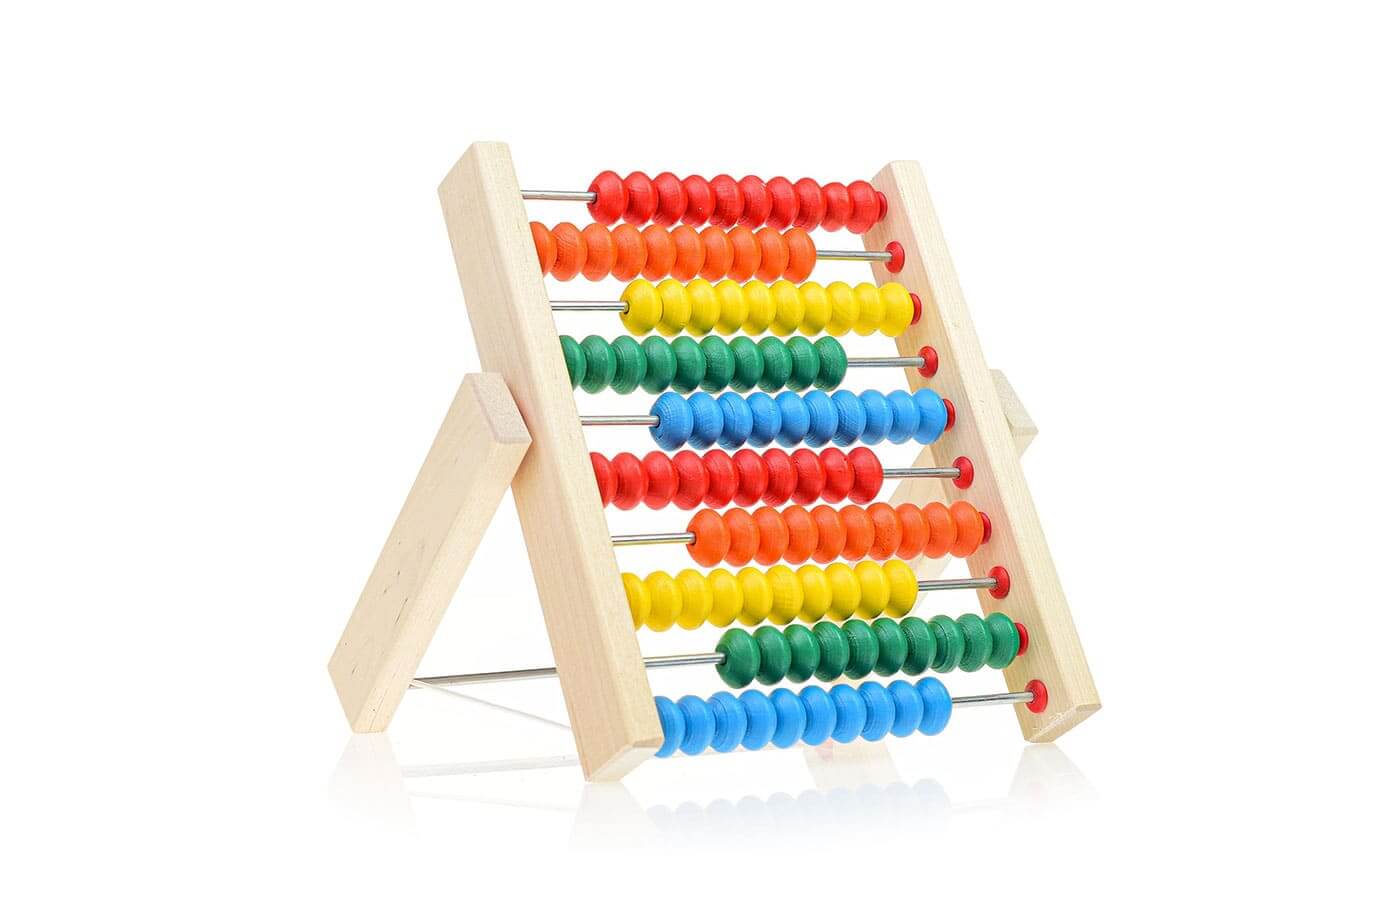 Wooden abacus for counting